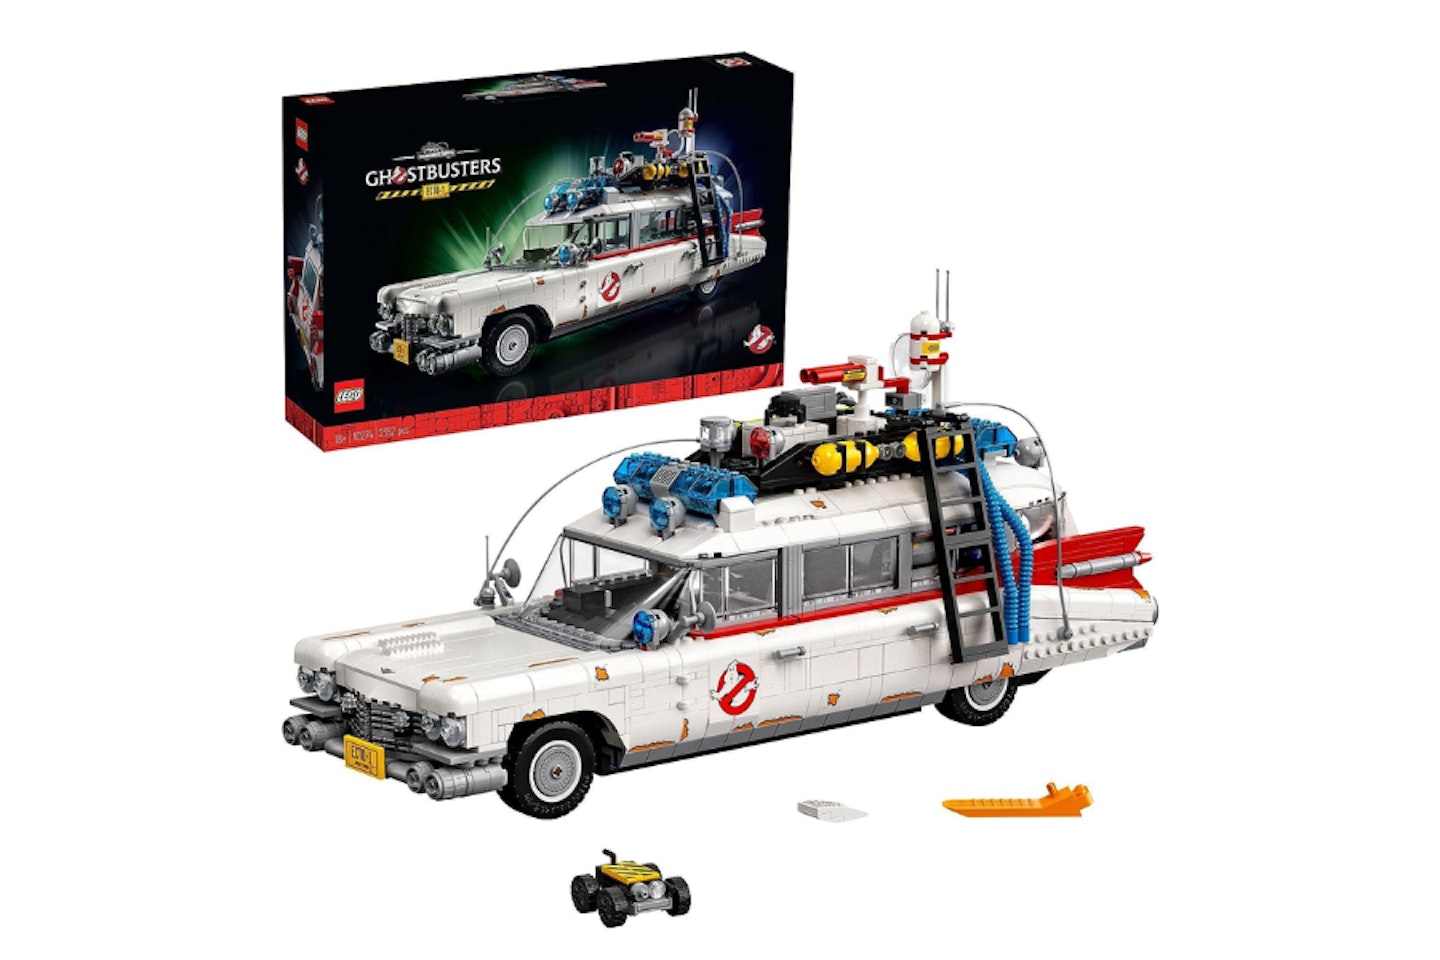 LEGO 10274 Icons Ghostbusters ECTO-1 Car Kit